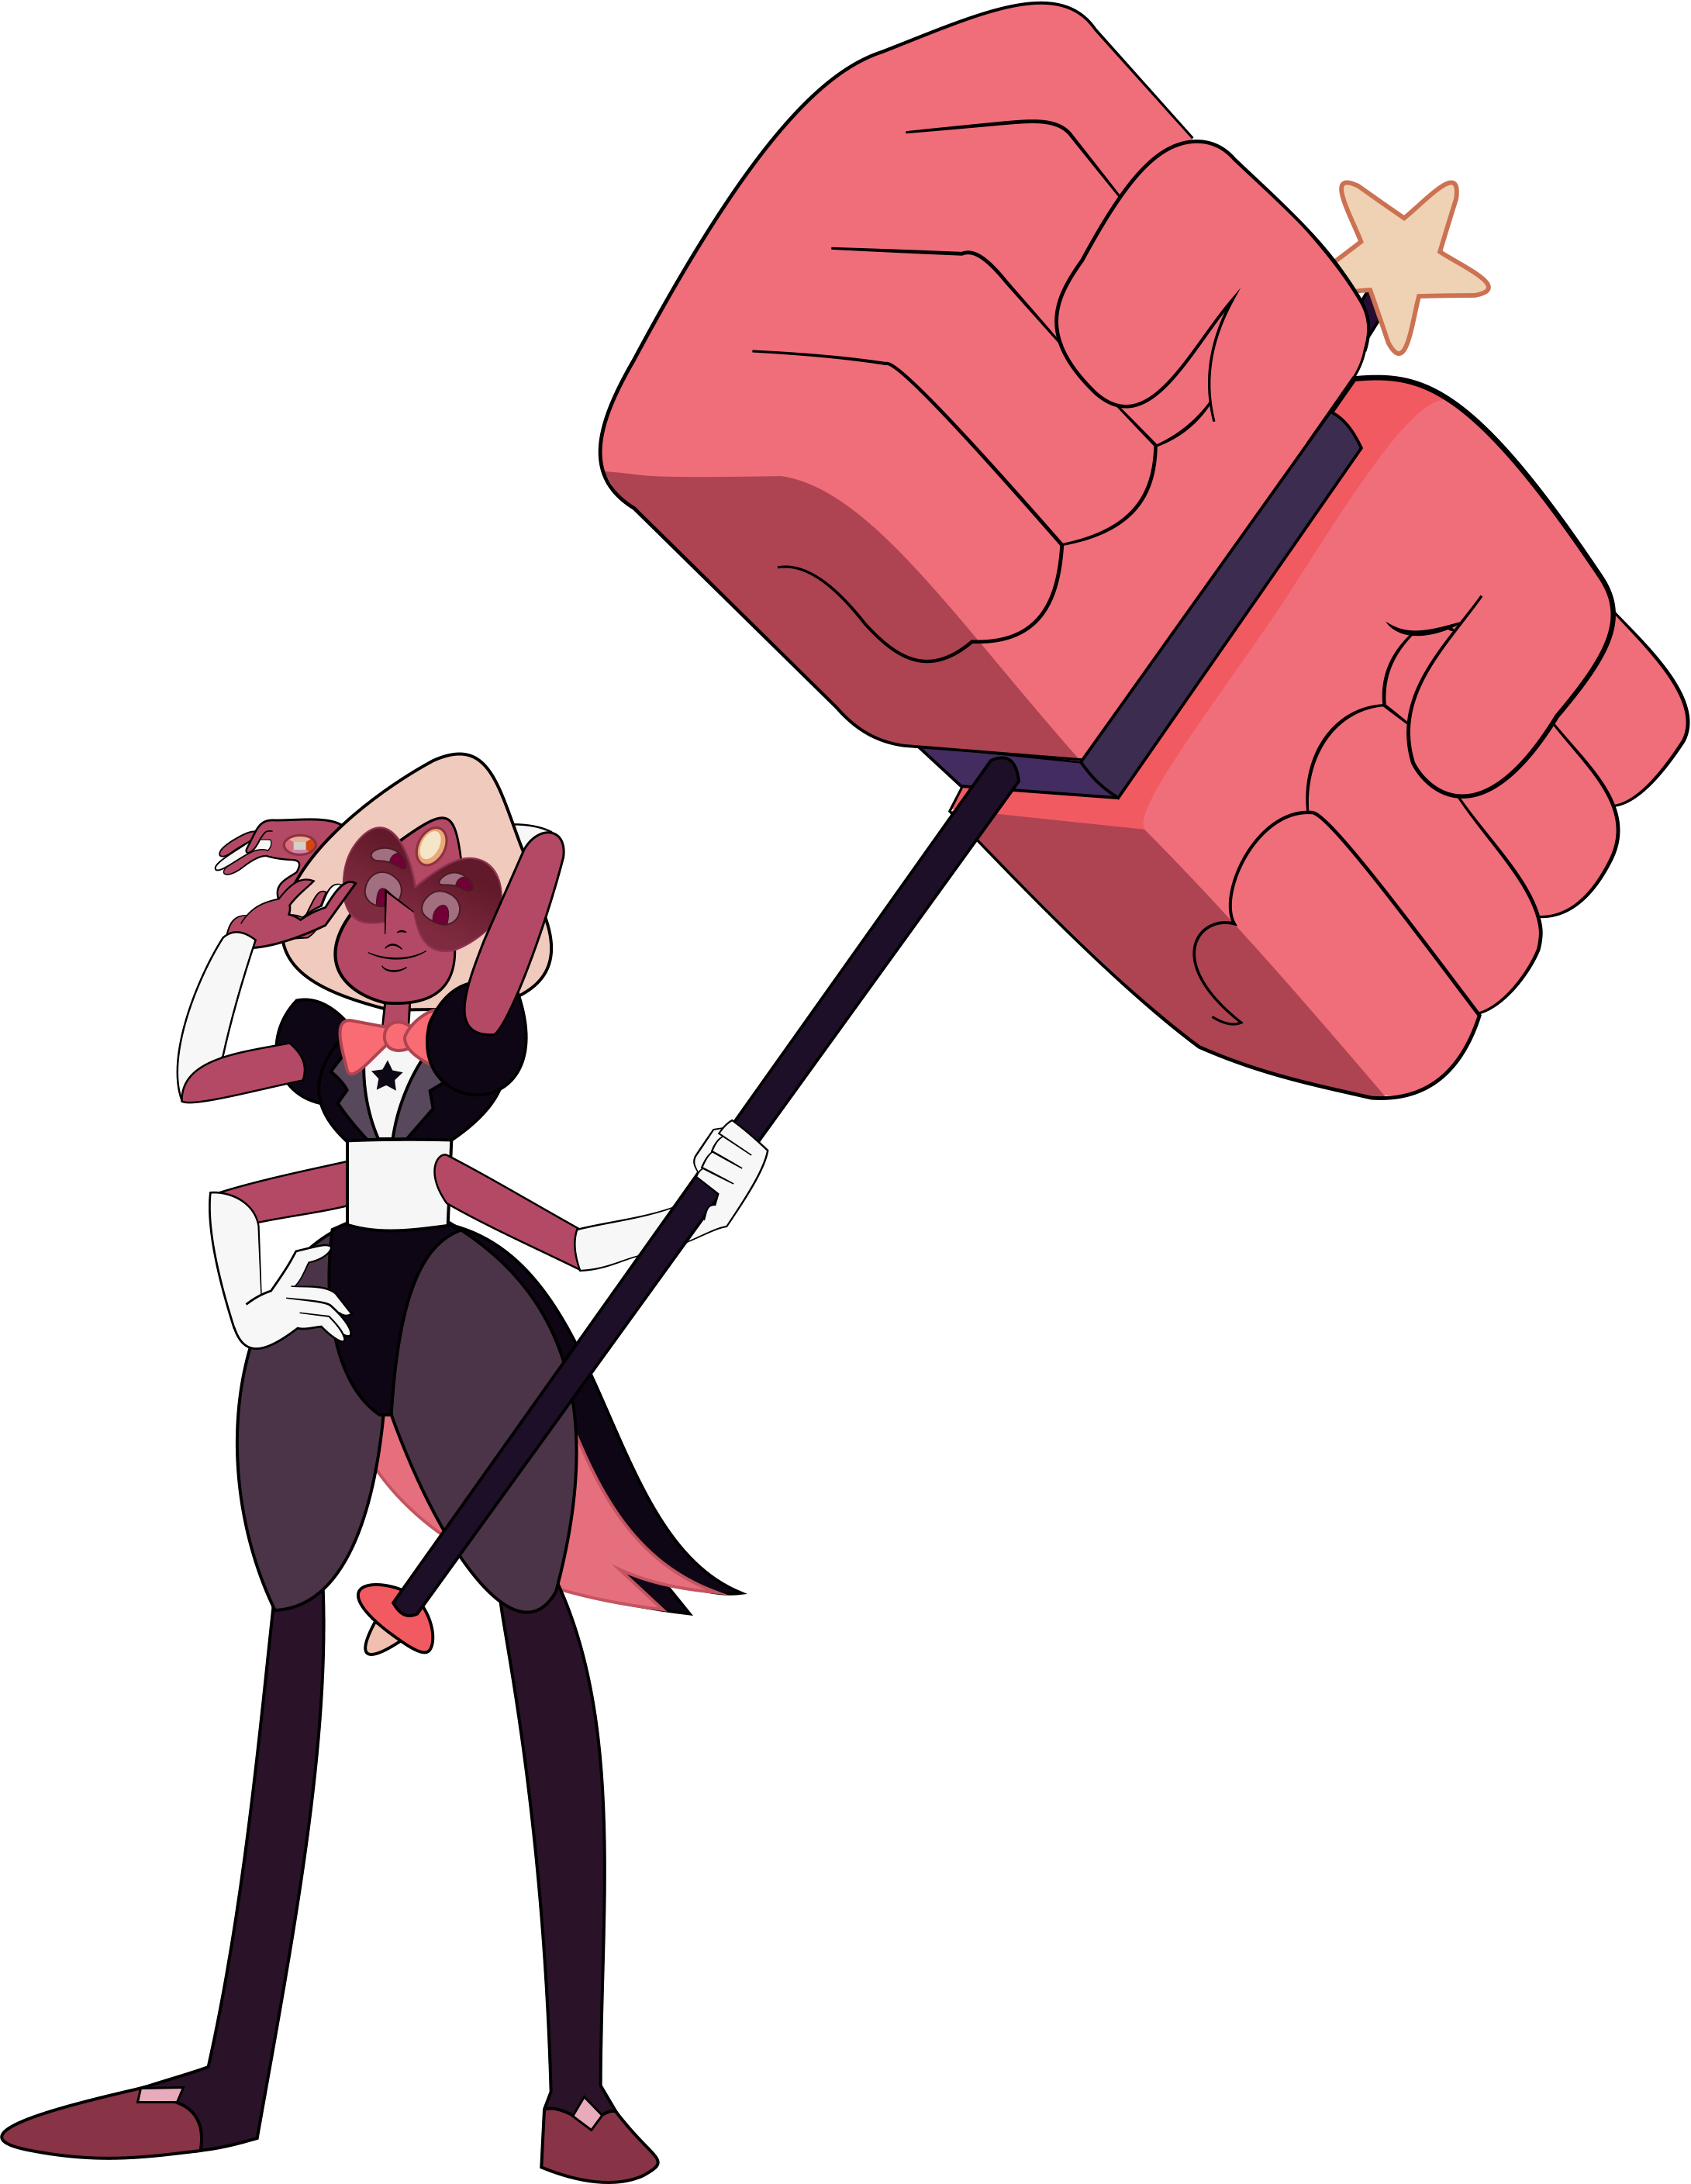 The Crystals Combined - Steven Universe Sardonyx Weapon (2181x2817)